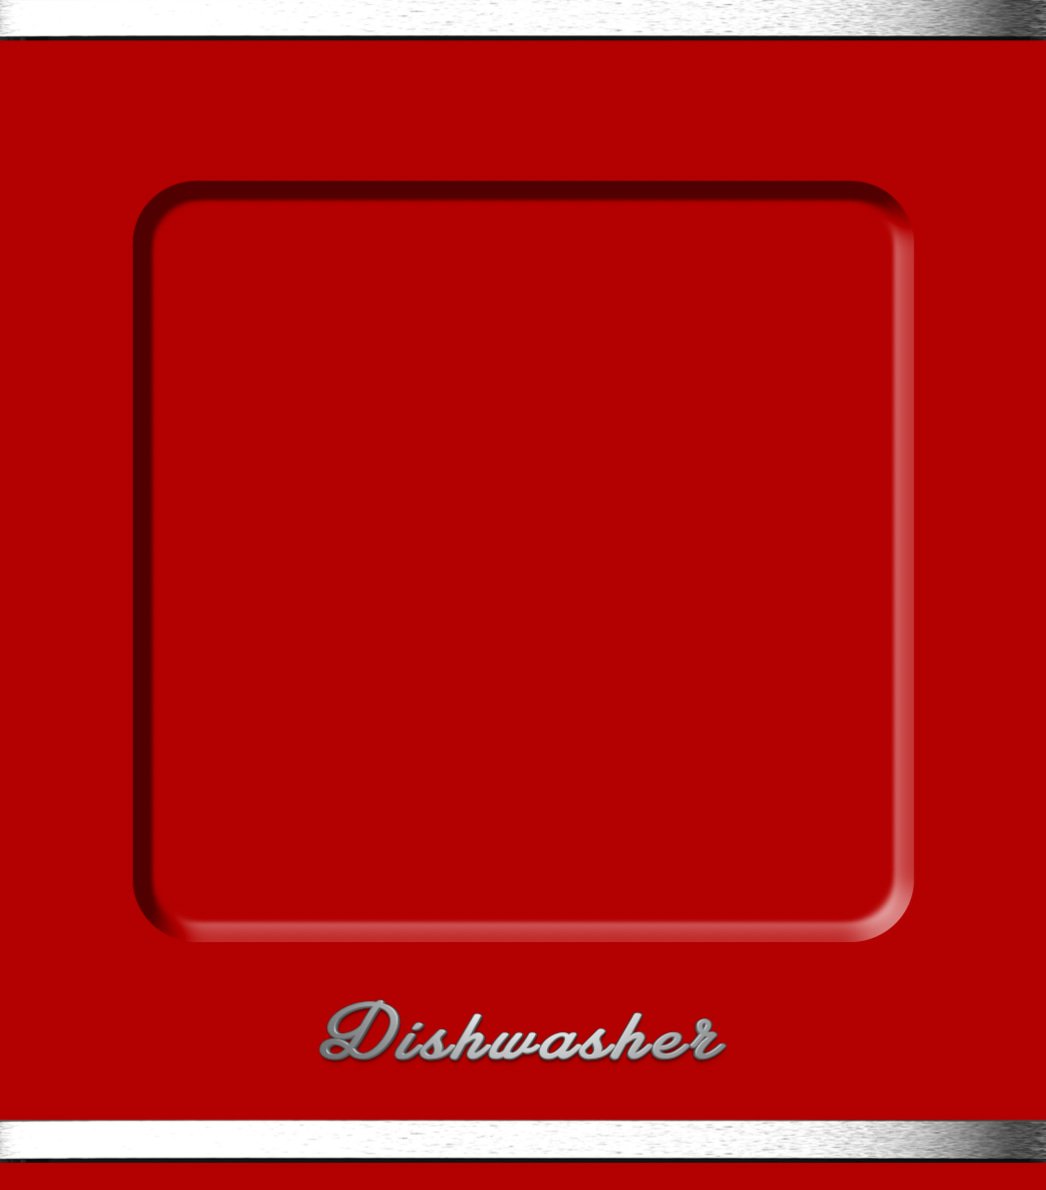 Retro Chrome-Trimmed Dishwasher Wrap Red